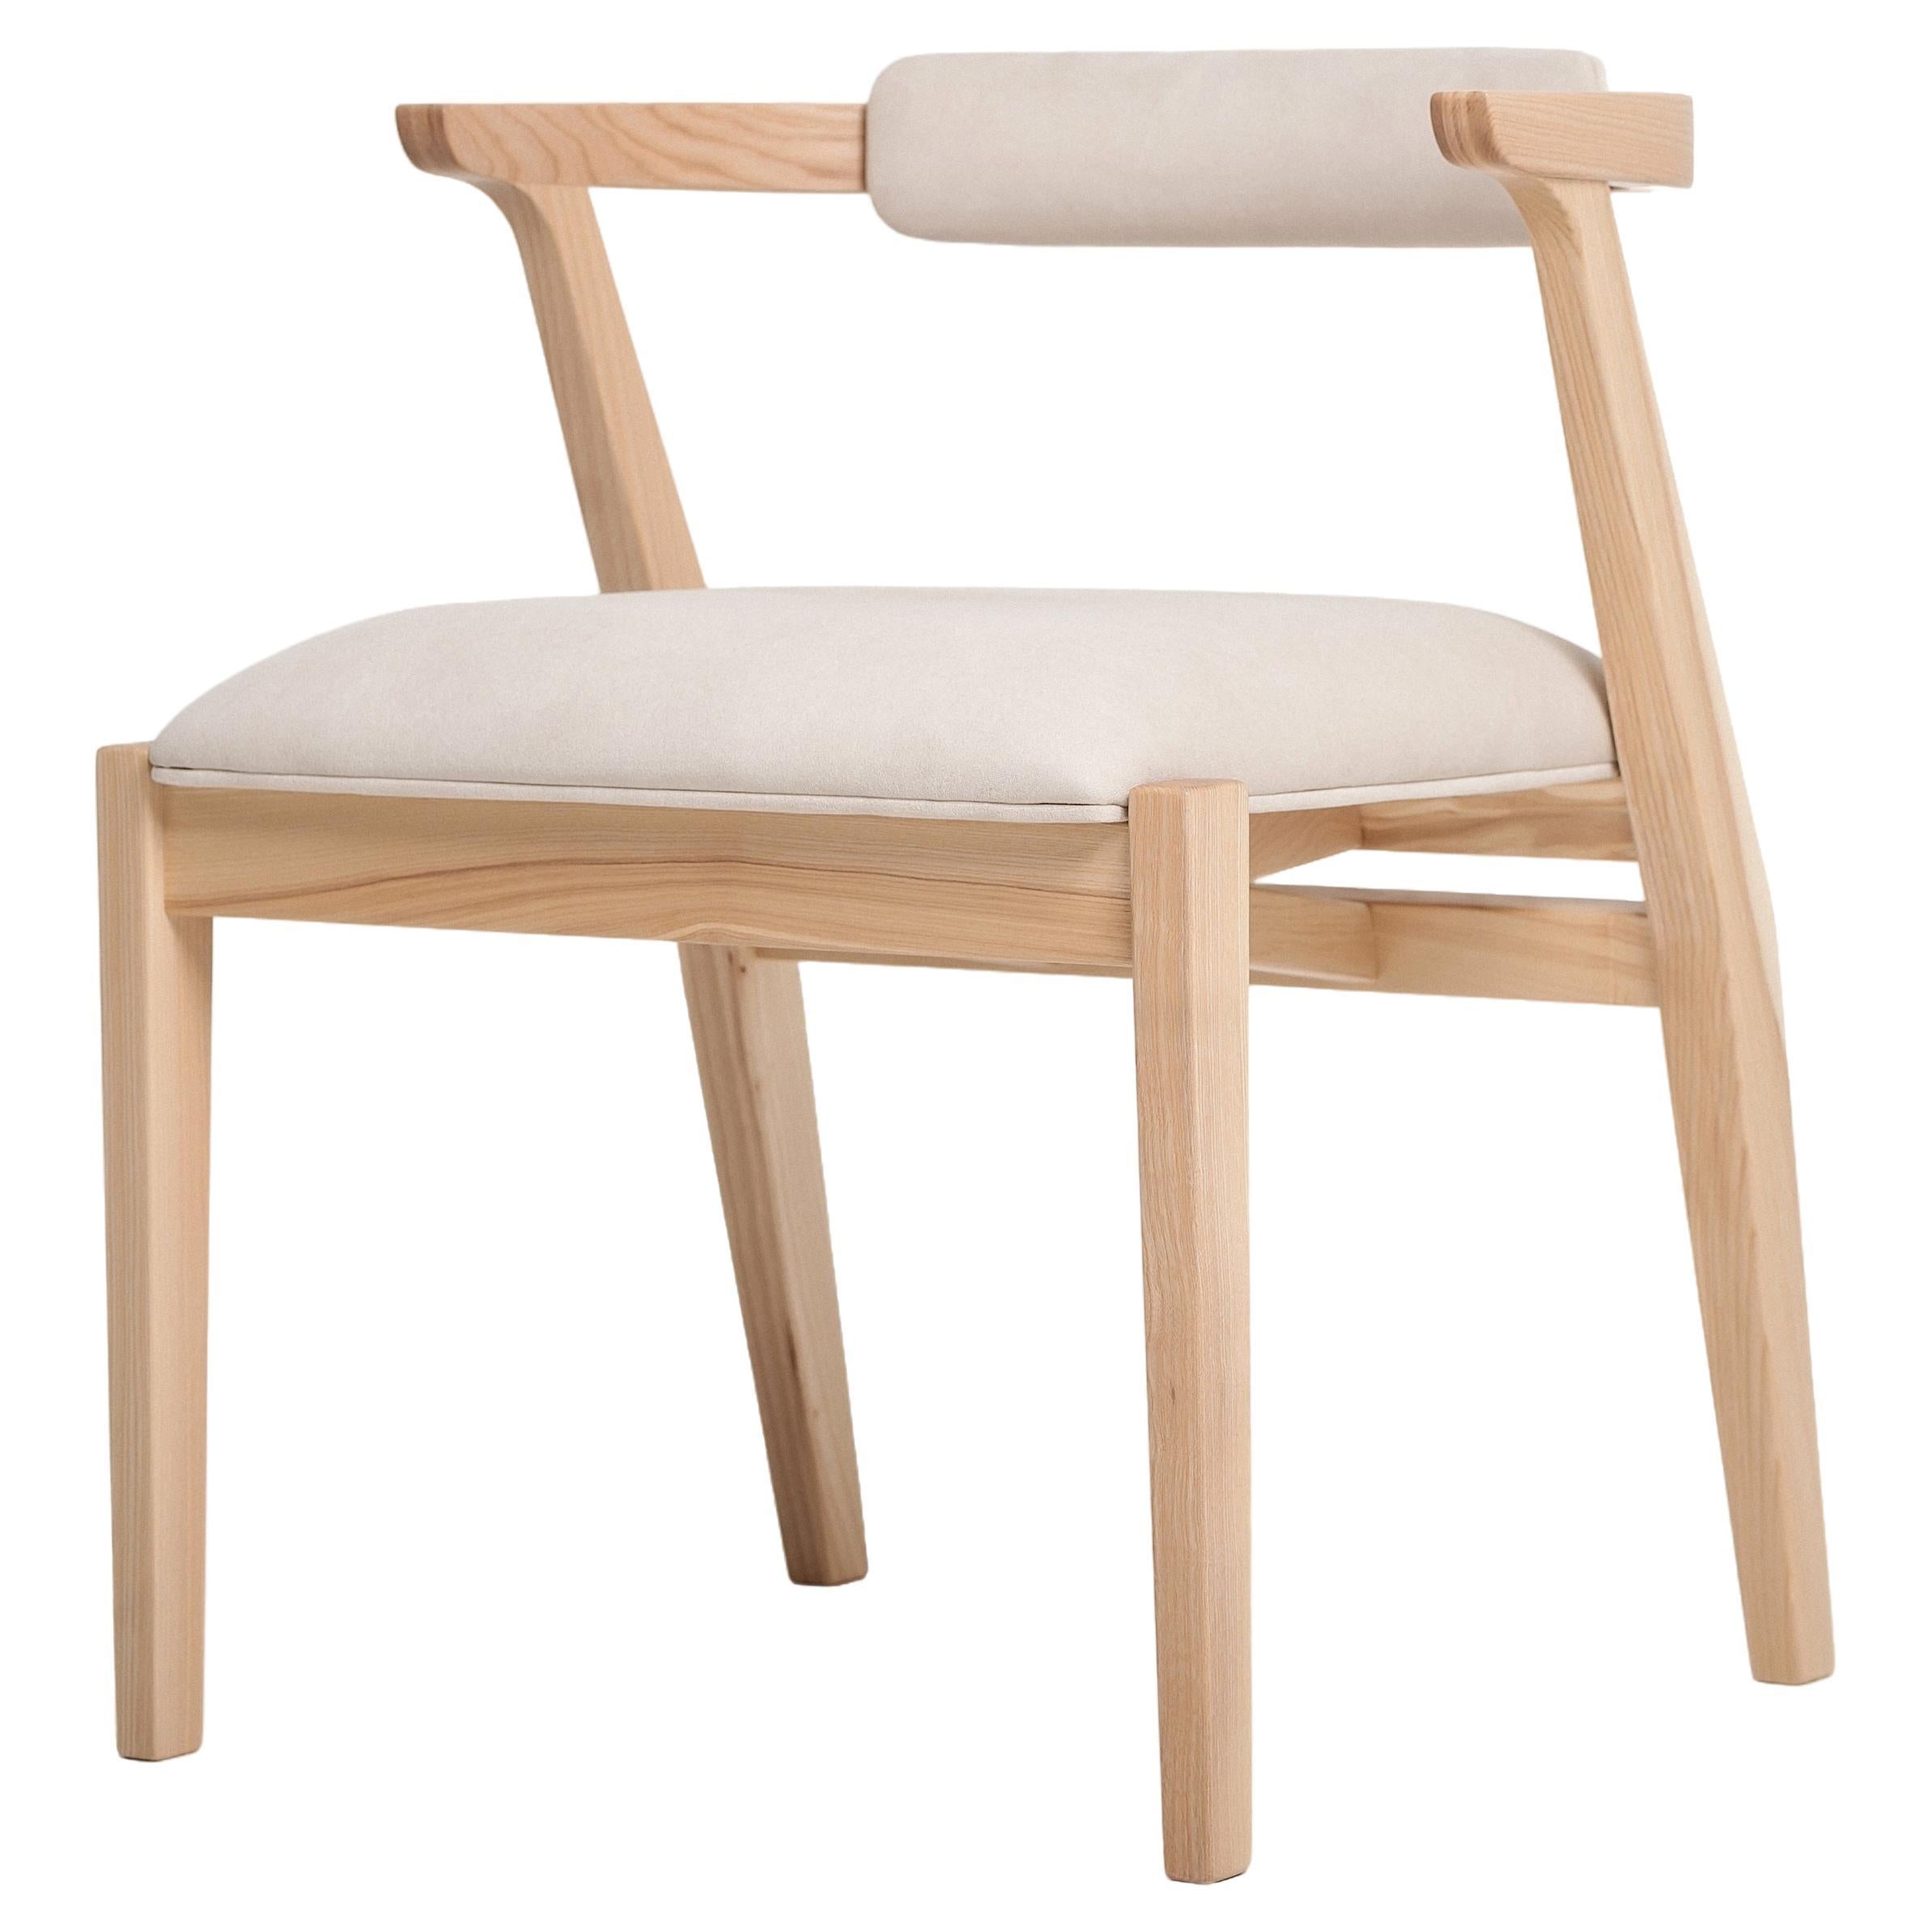 Modern Dining, Restaurant Room Chairs in Ash Solid Wood and Beige Material